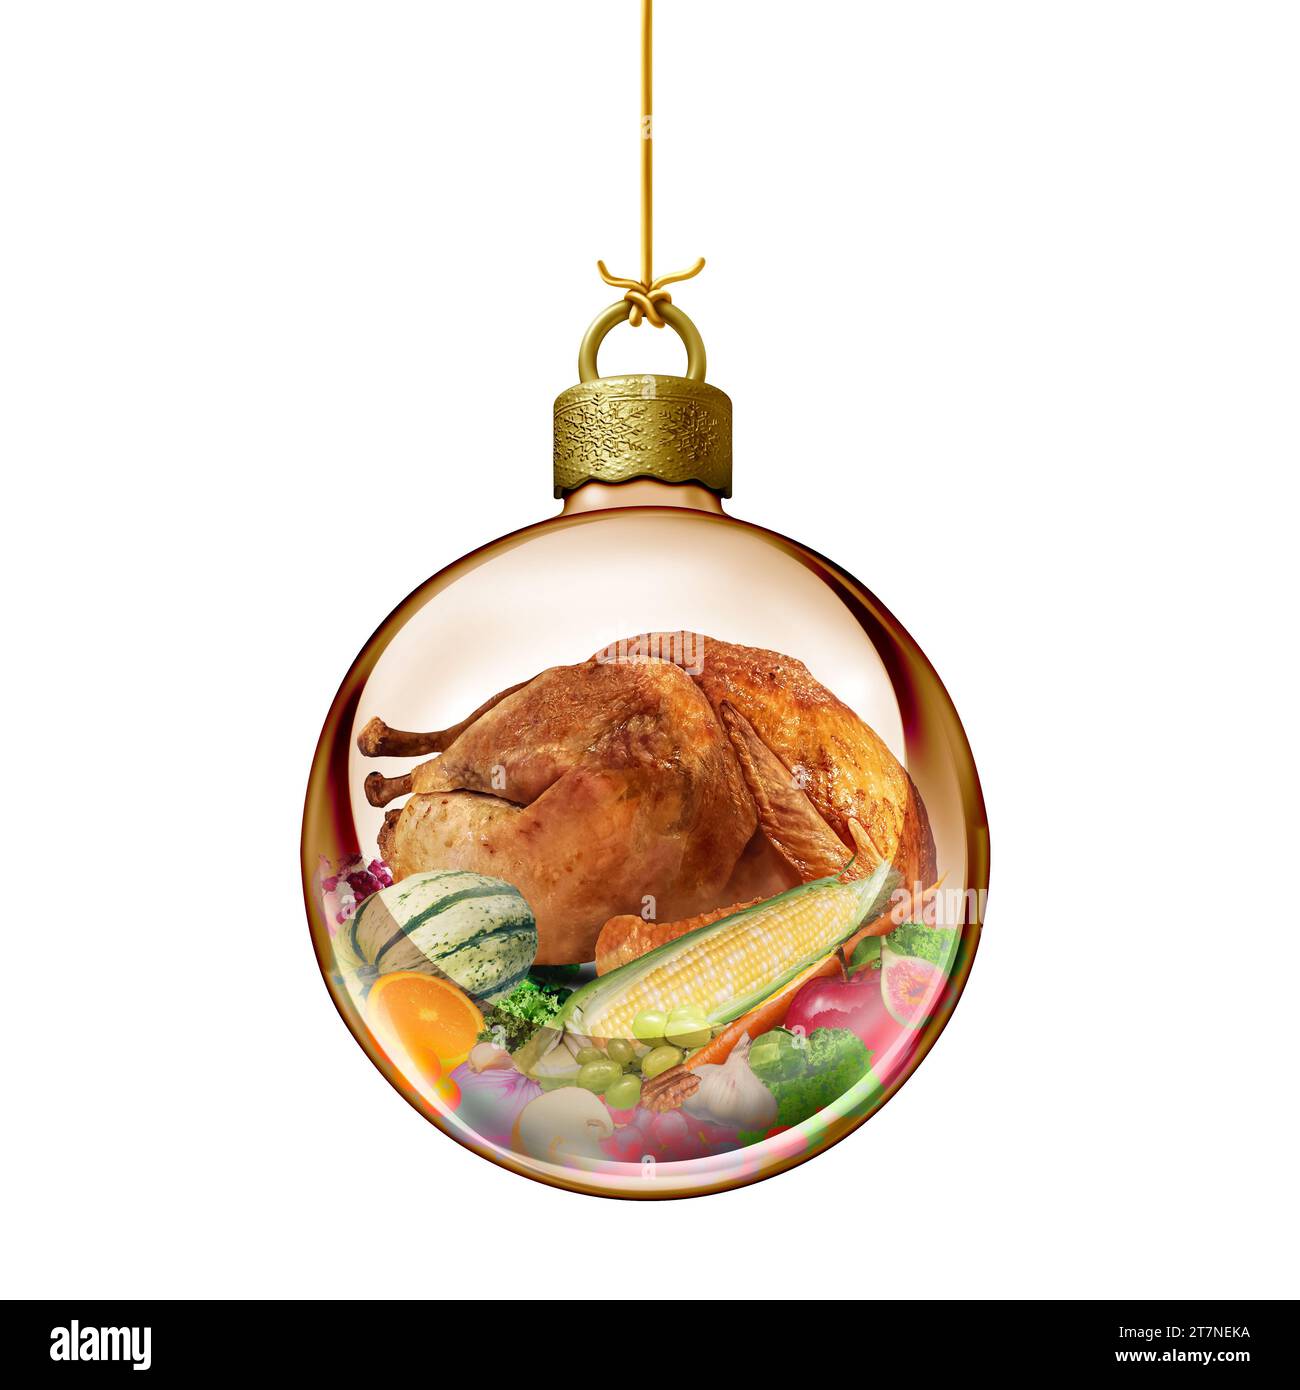 Christmas Holiday Food Symbol and Thanksgiving dinner as a Glass Christmas Ball ornament as a seasonal ornamental design element with a Traditional Stock Photo